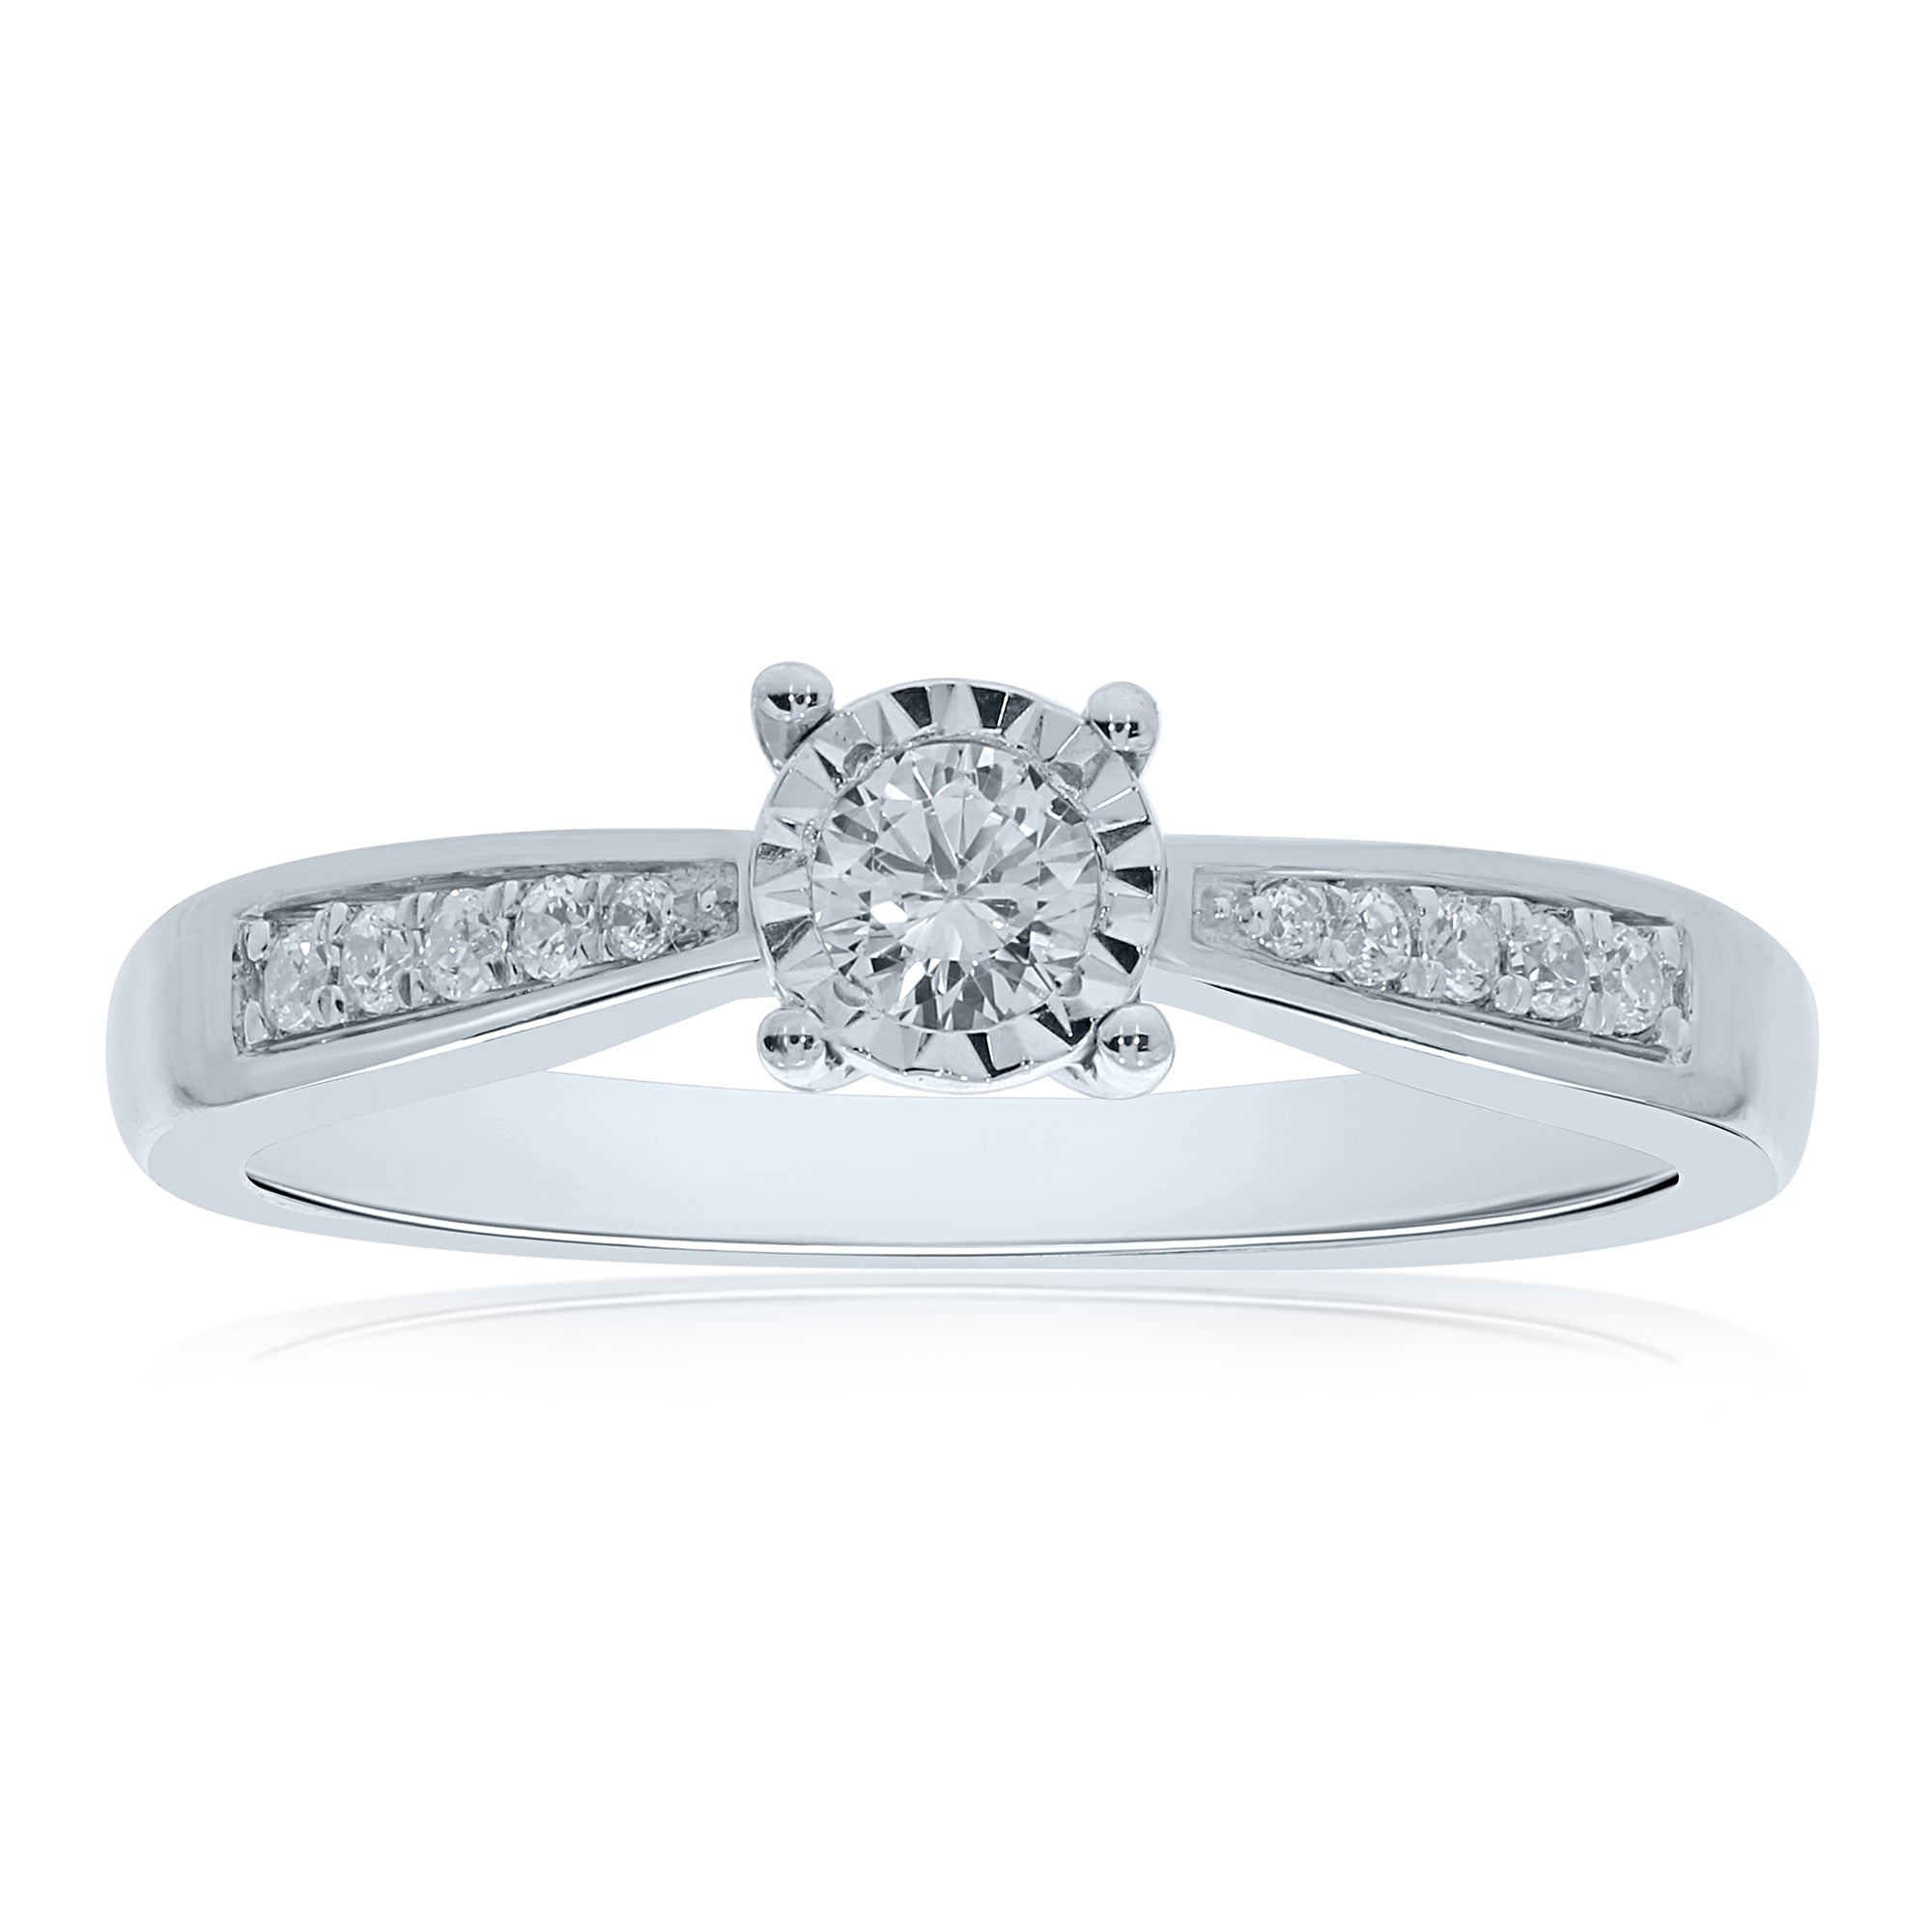 9ct white gold single stone miracle plate diamond ring with diamond shoulders 0.33ct